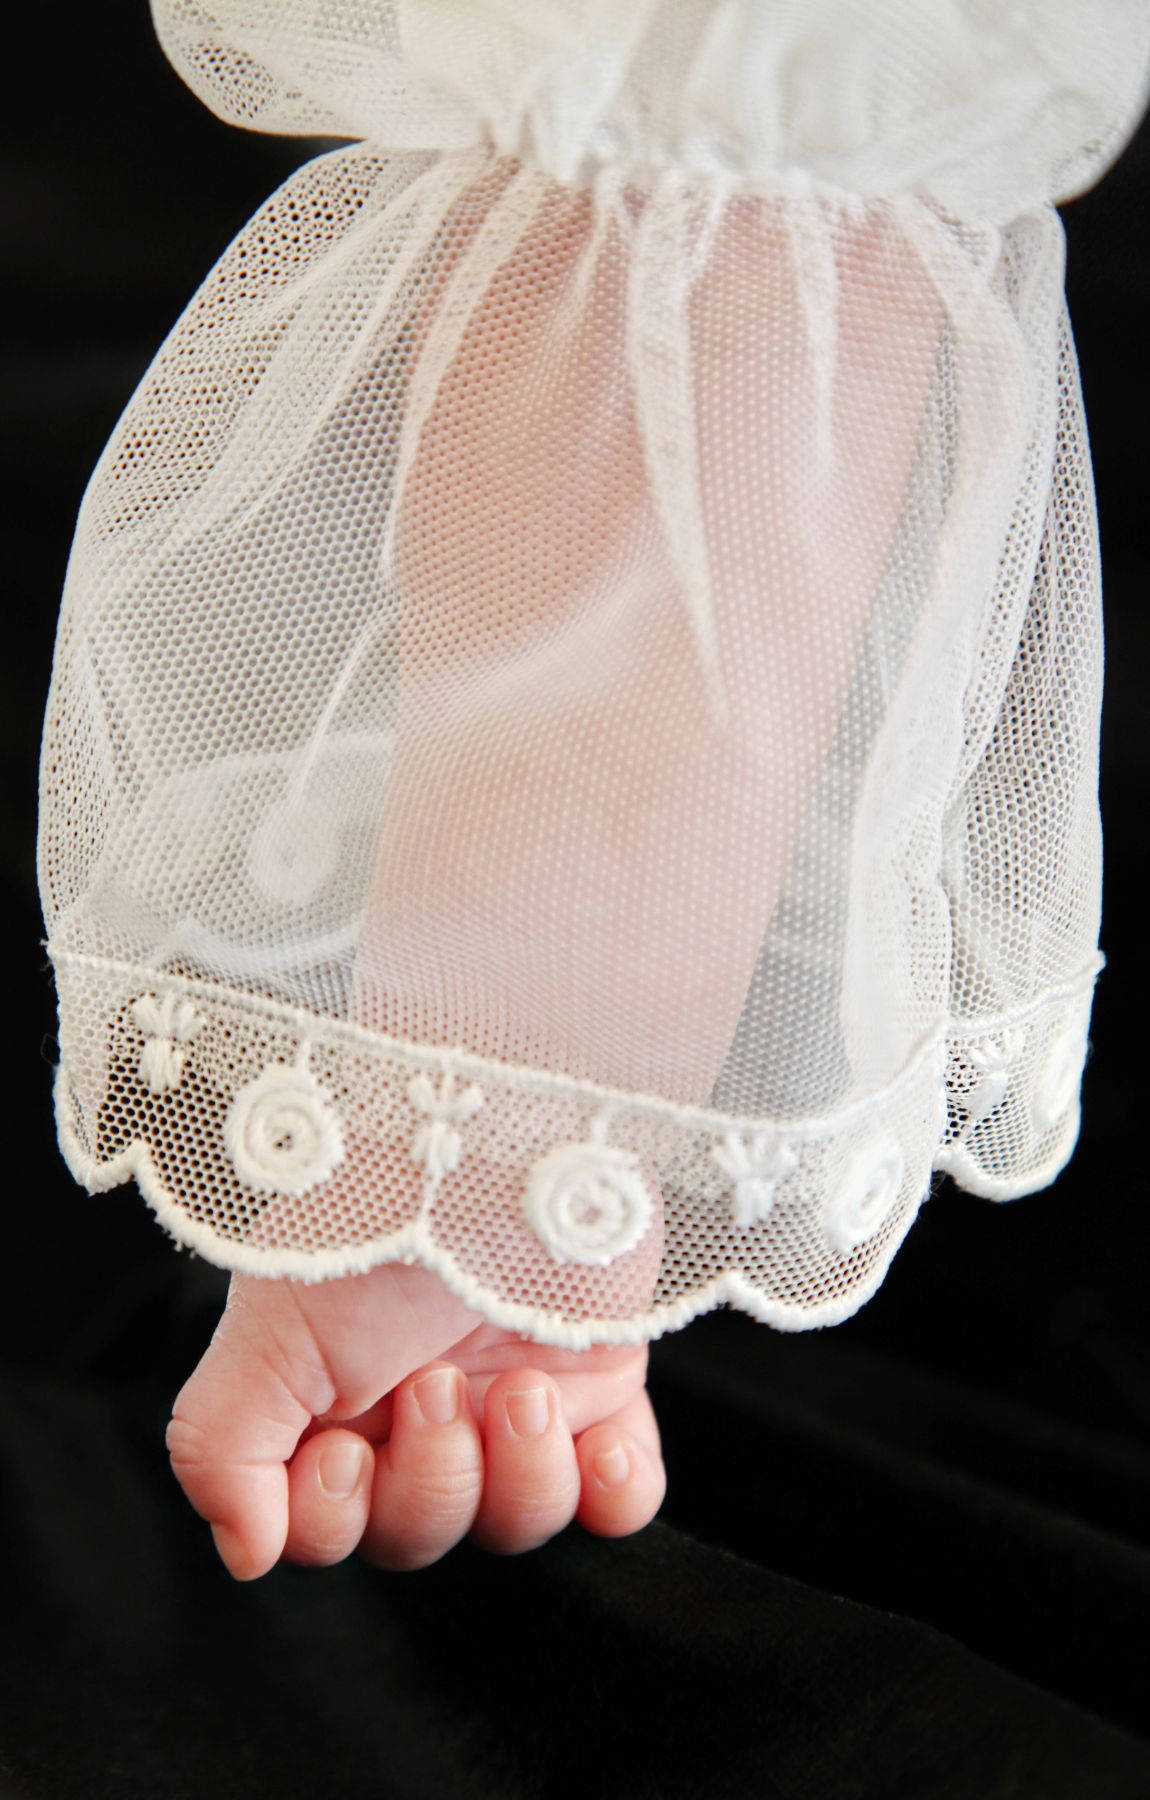 Baby Hand In See-through Sleeves Wallpaper